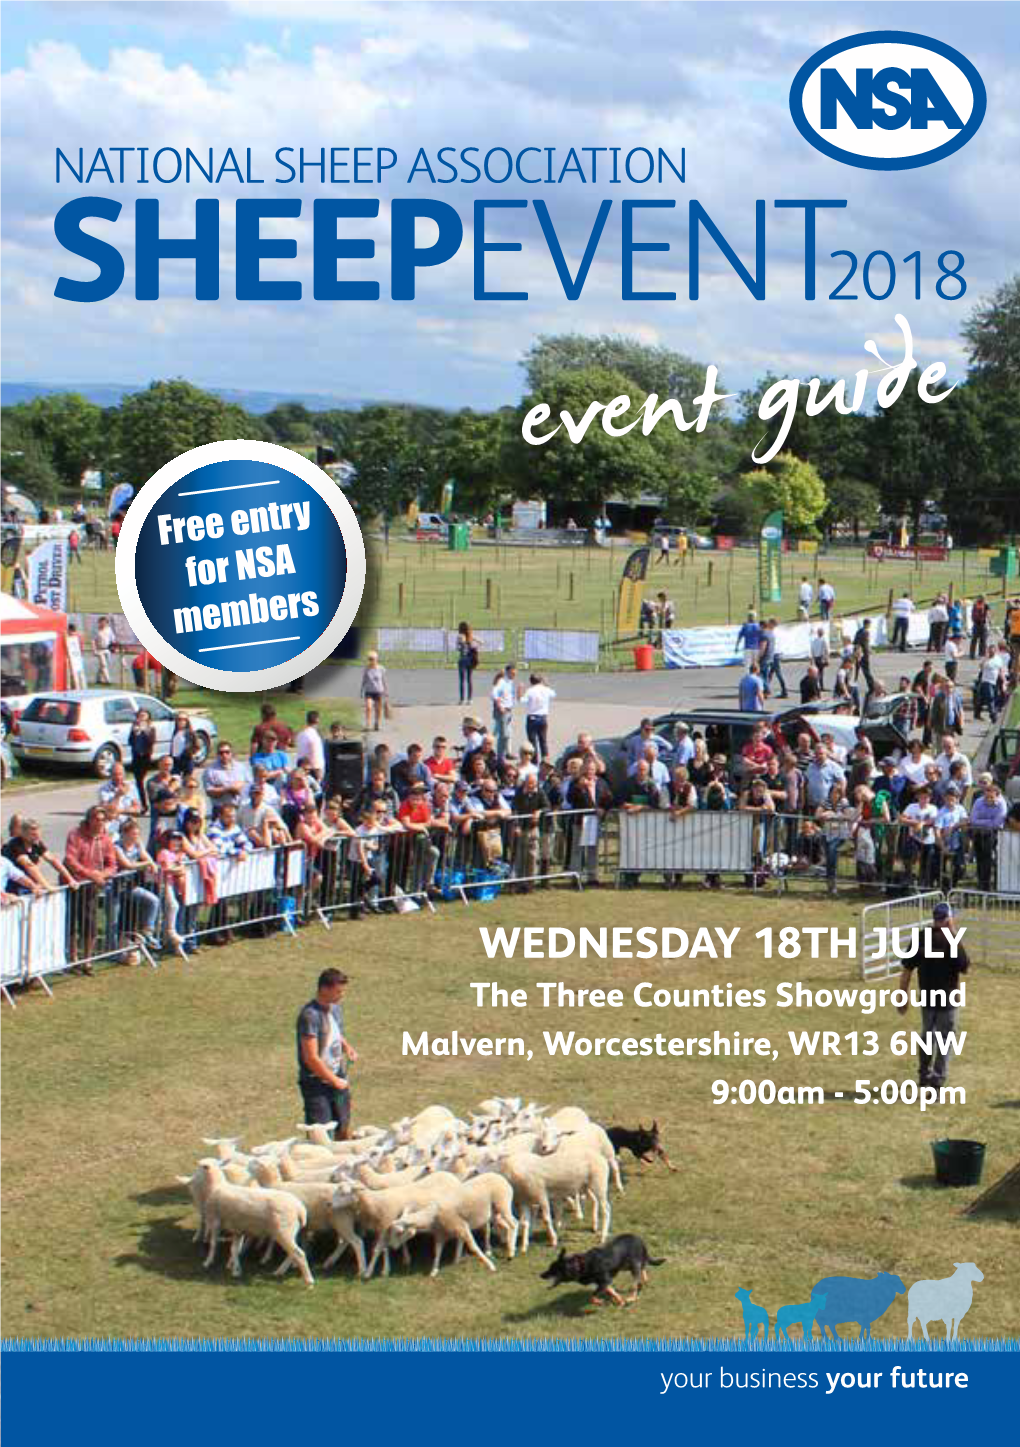 SHEEPEVENT2018 Event Guide Free Entry for NSA Members